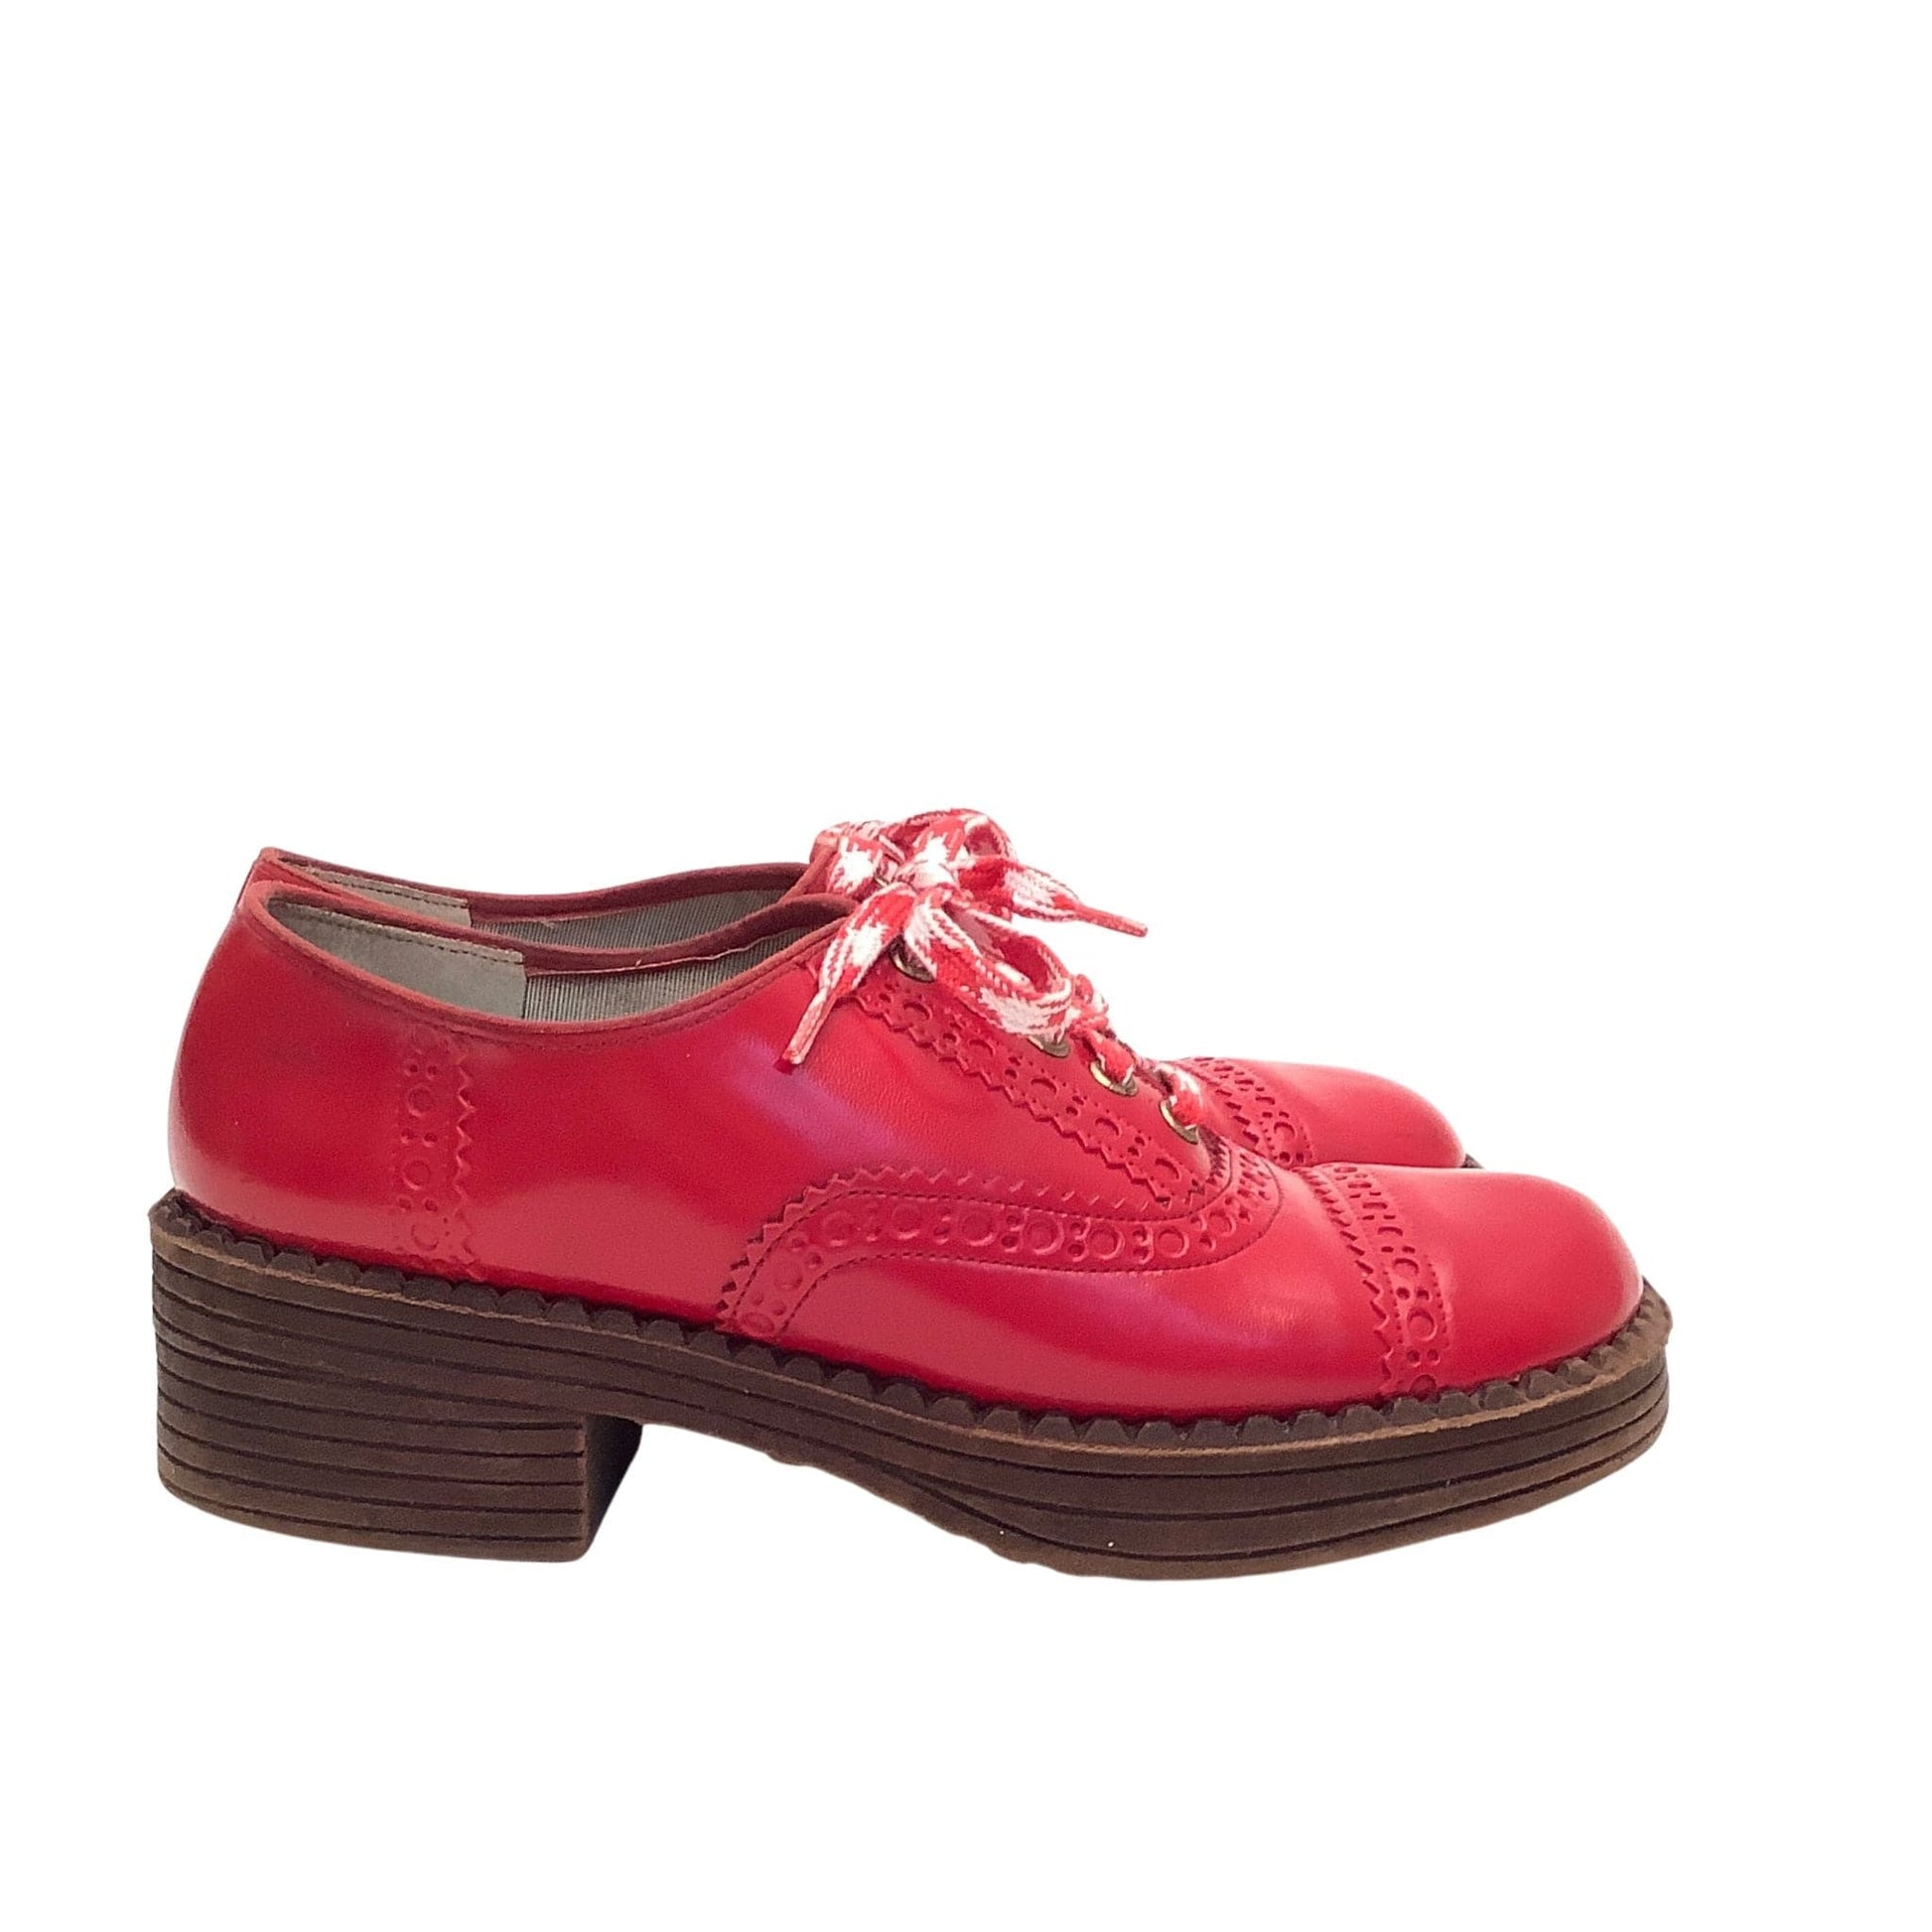 Sears Chunky Red Brogues 7 / Red / Vintage 1960s